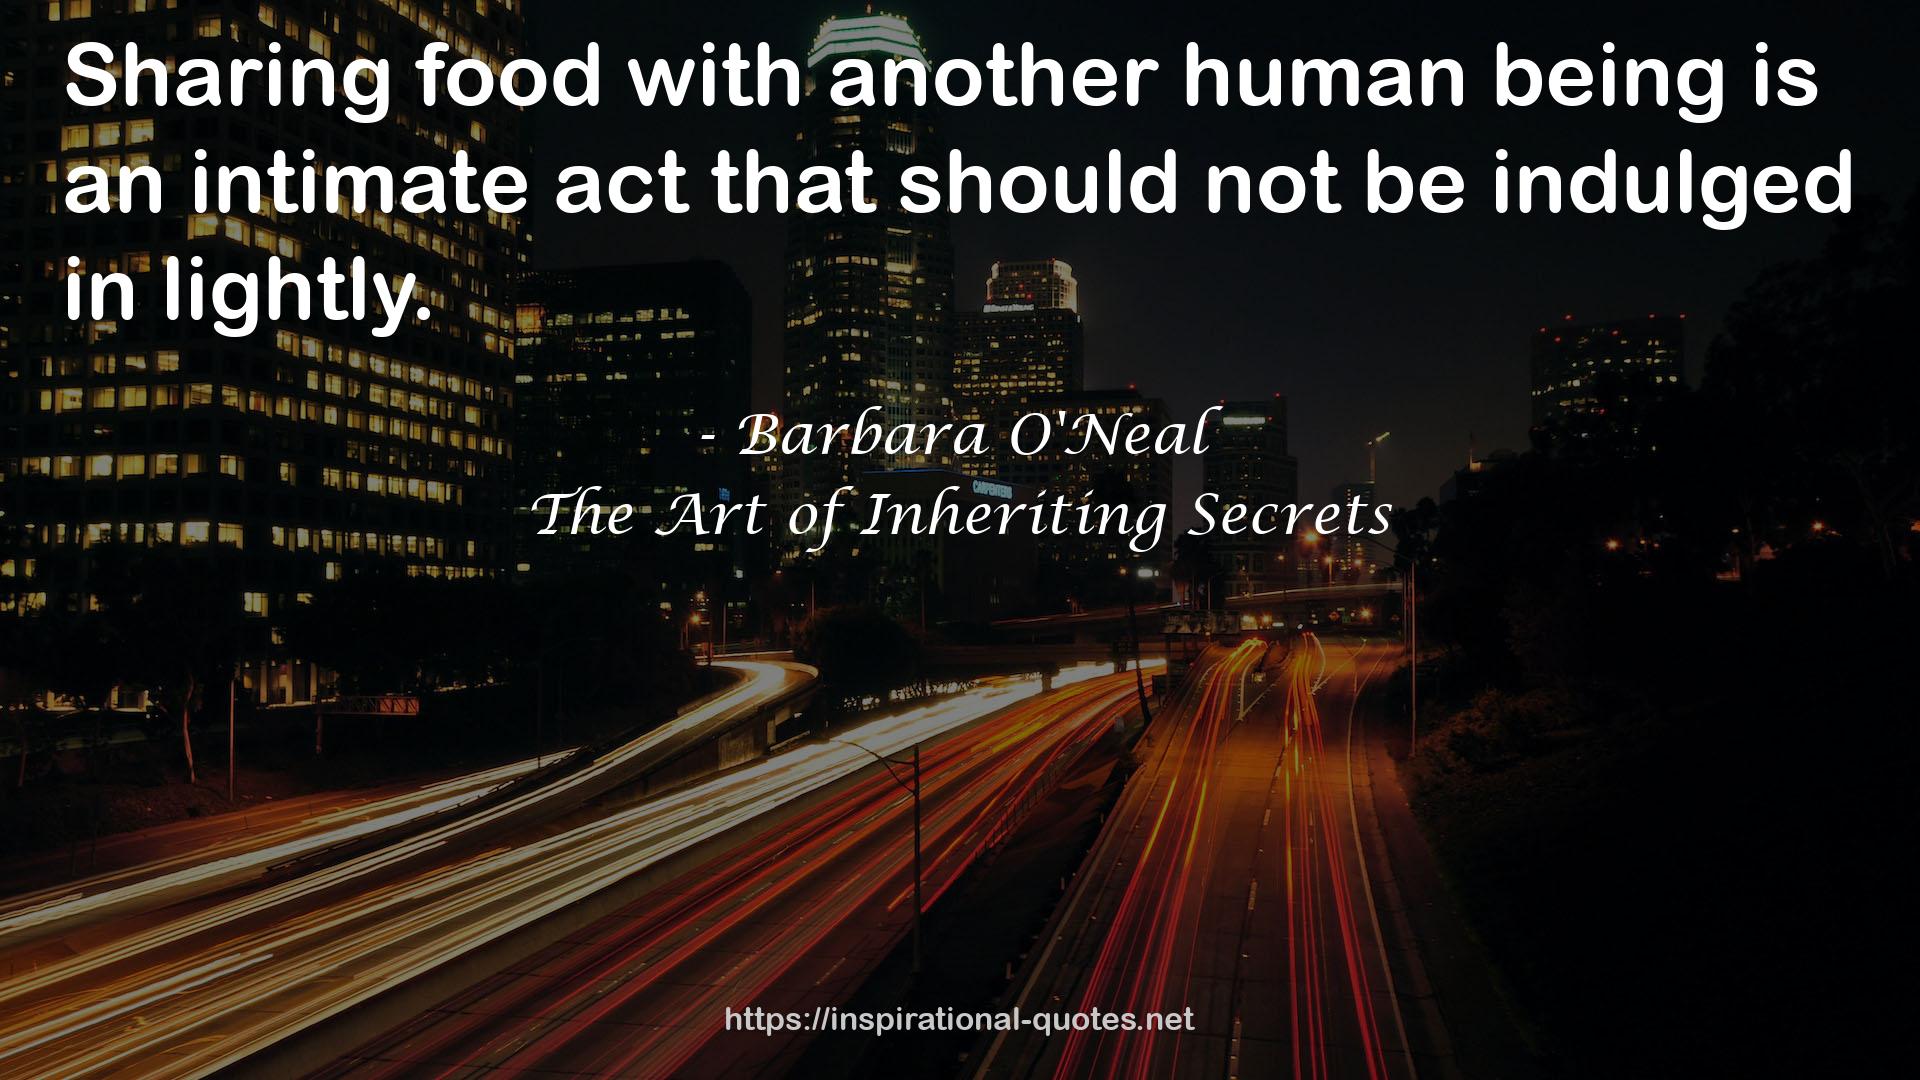 The Art of Inheriting Secrets QUOTES